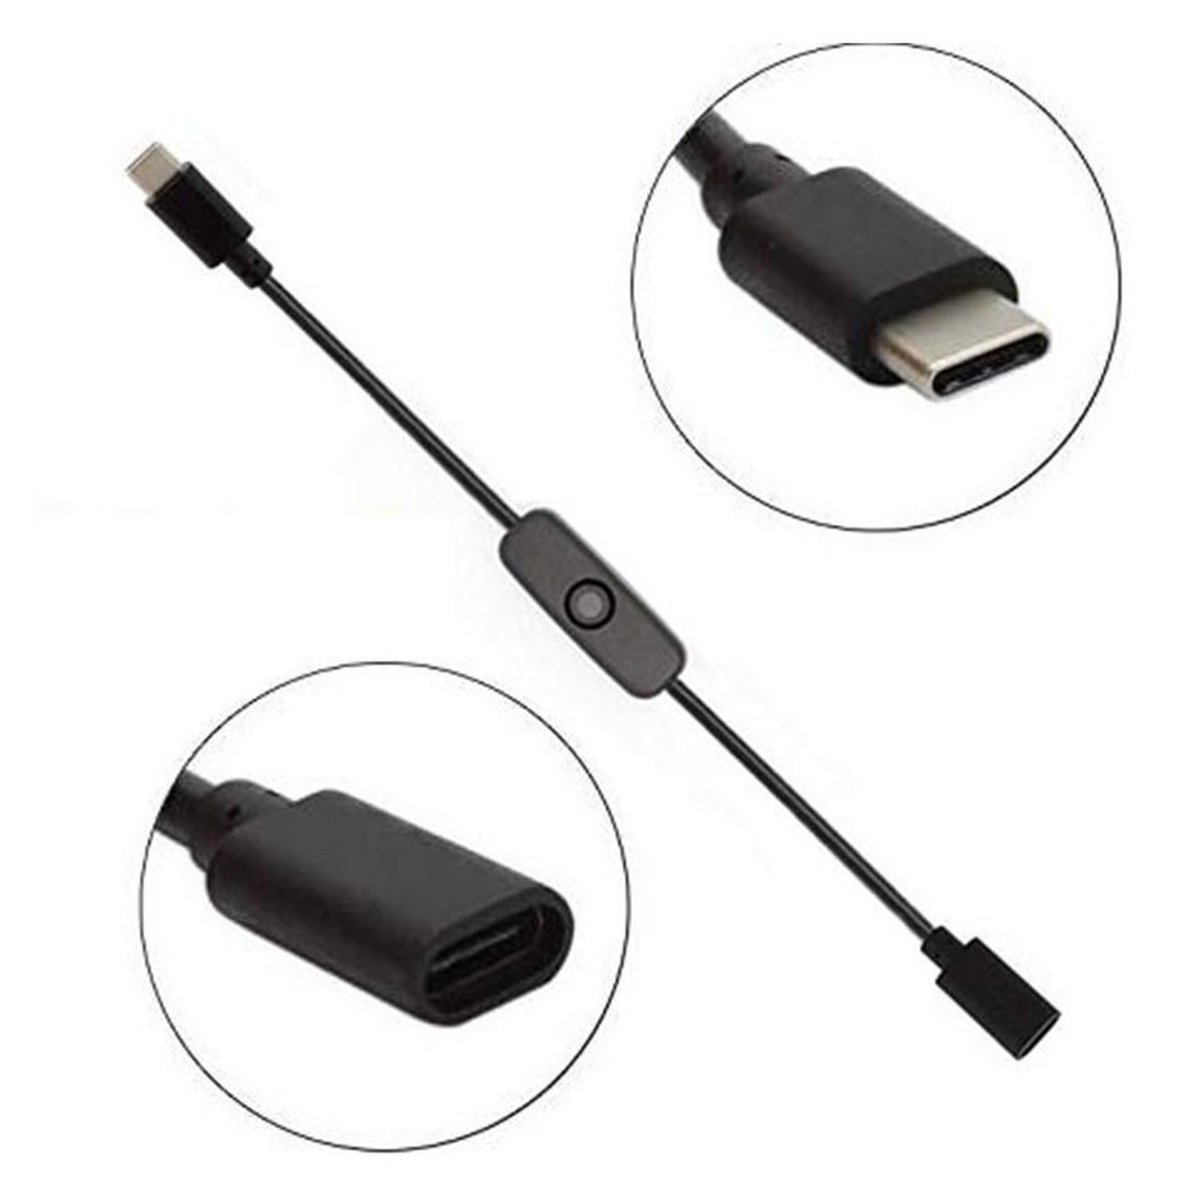 Usb C Power Switch Usb Type C For Raspberry Pi 4 From Pastall On